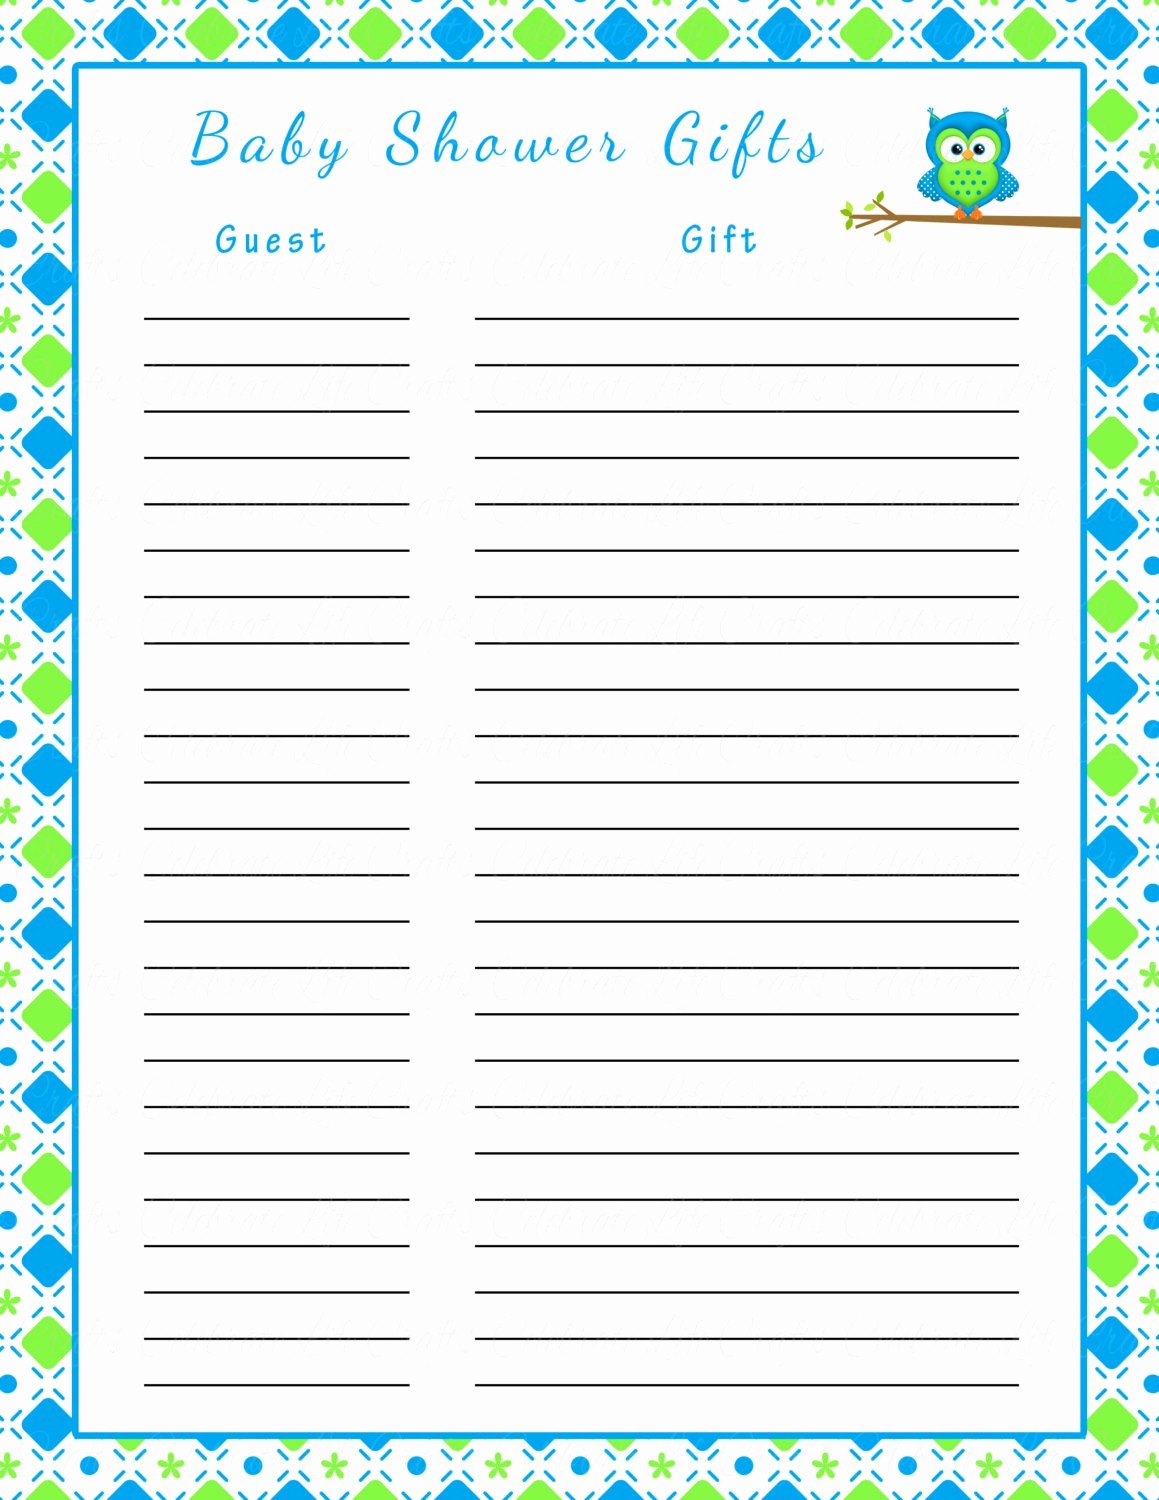 Baby Shower Guest List Printable New Printable Baby Shower Gift List Template Gifts Gifts Mughals